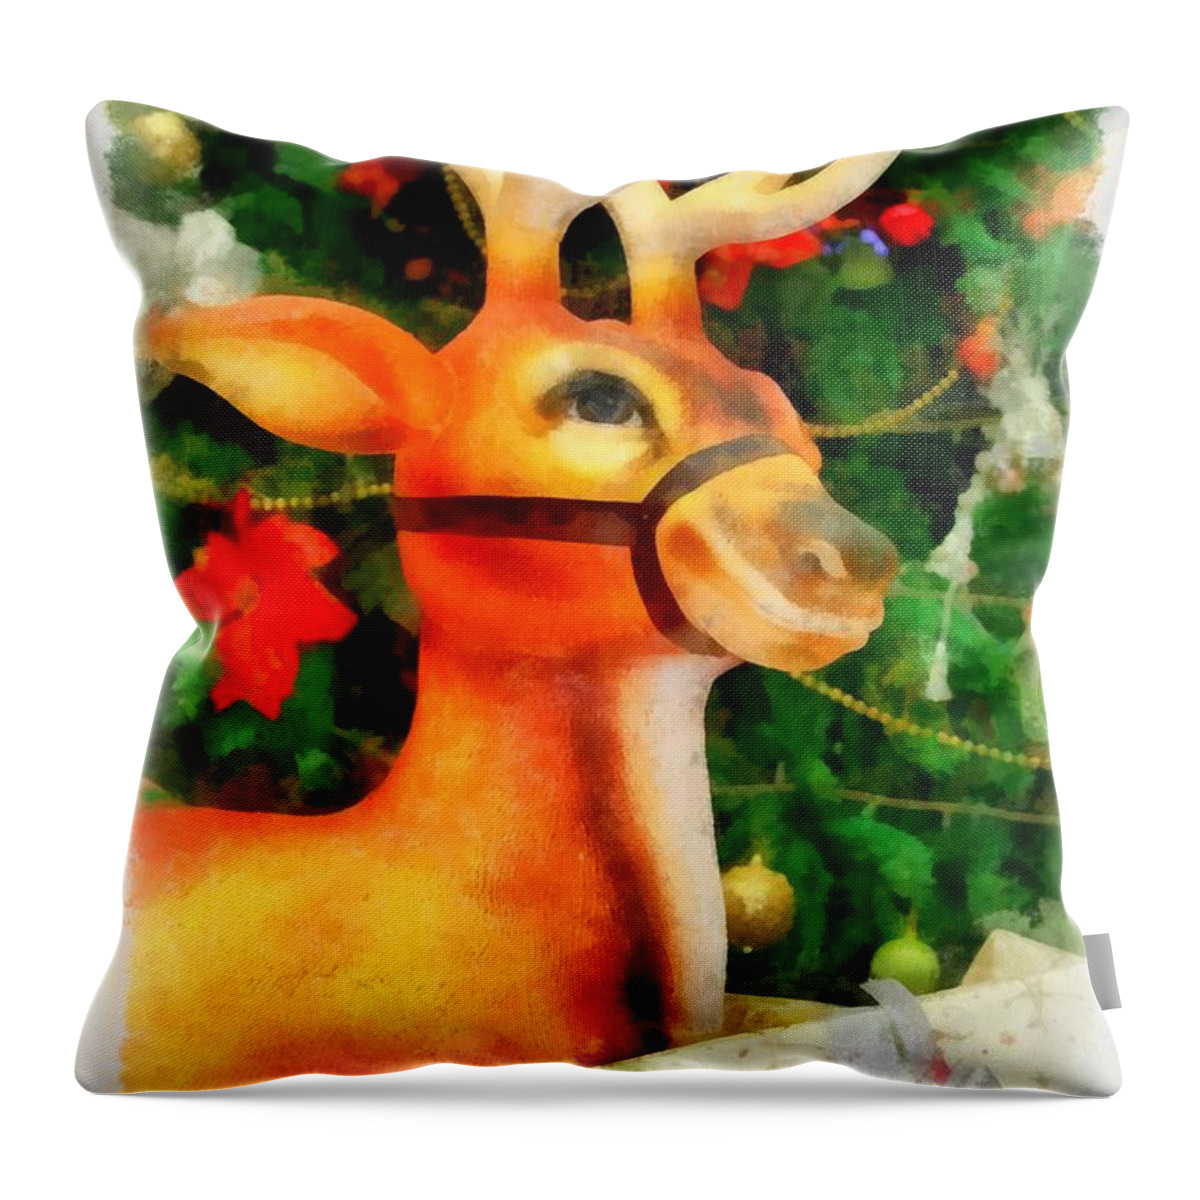 Christmas Throw Pillow featuring the painting Christmas Reindeer by Esoterica Art Agency